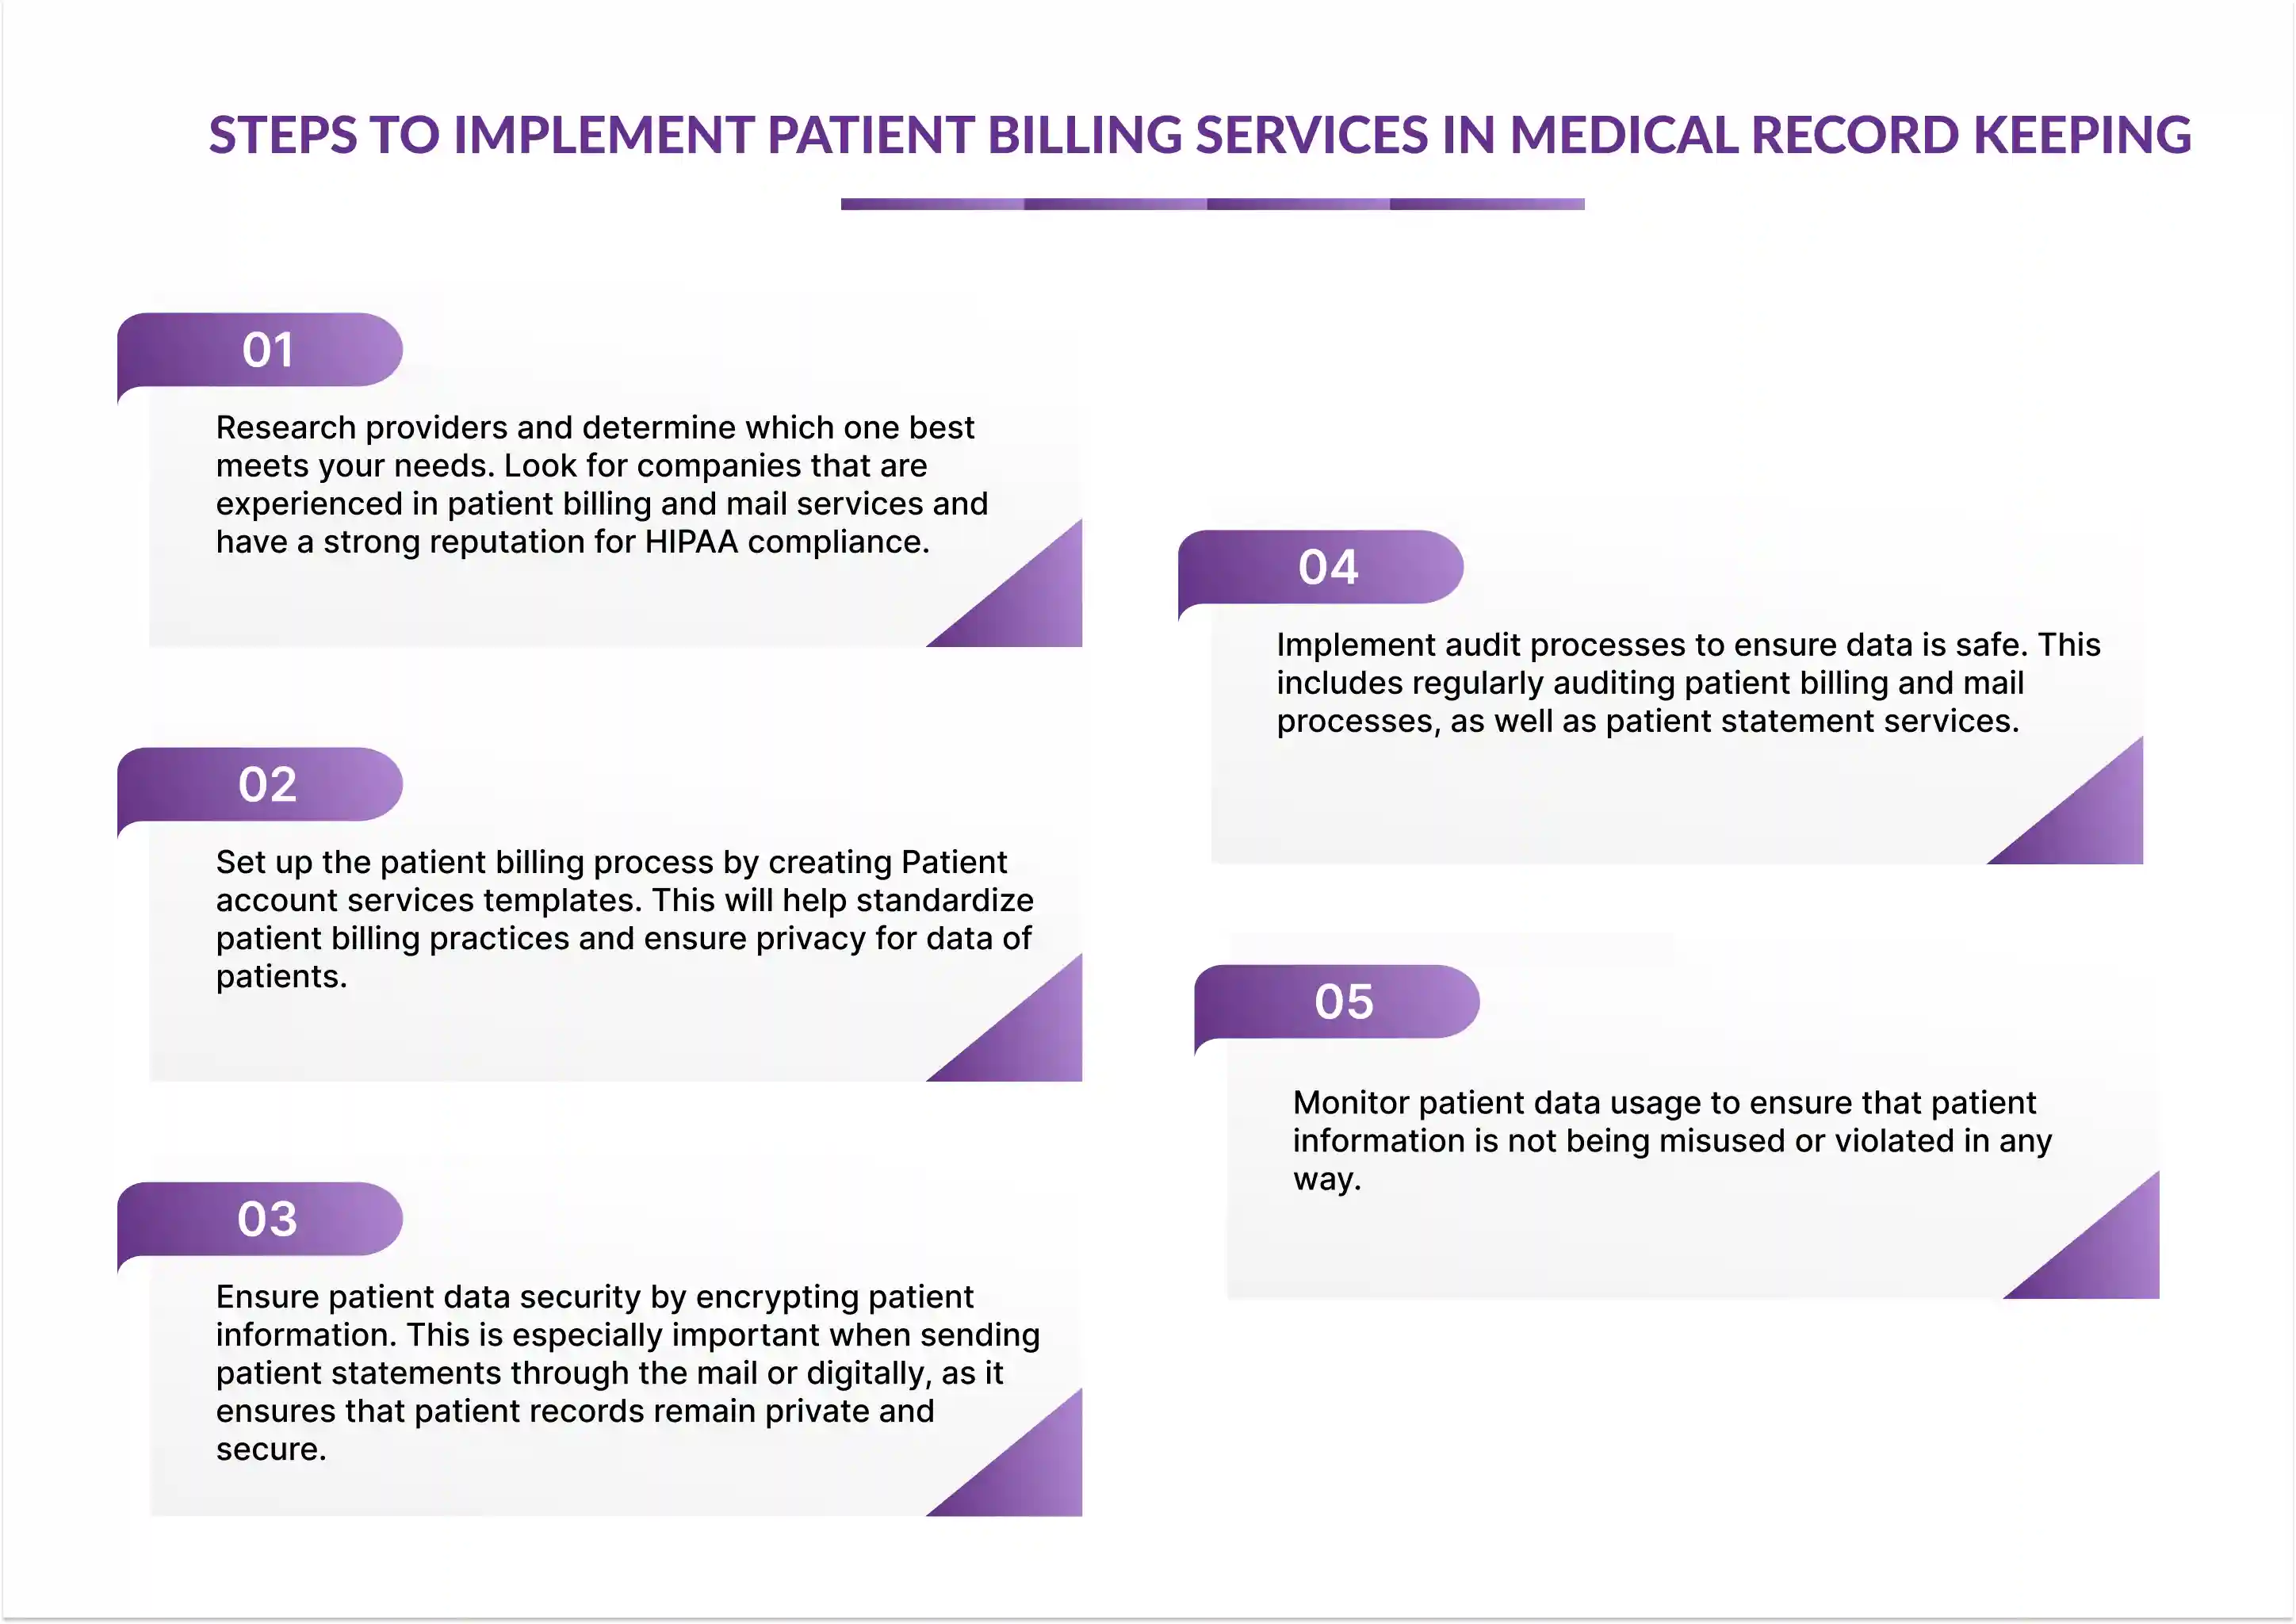 steps-to-impelment-patient-statement-services-in-medical-record-keeping